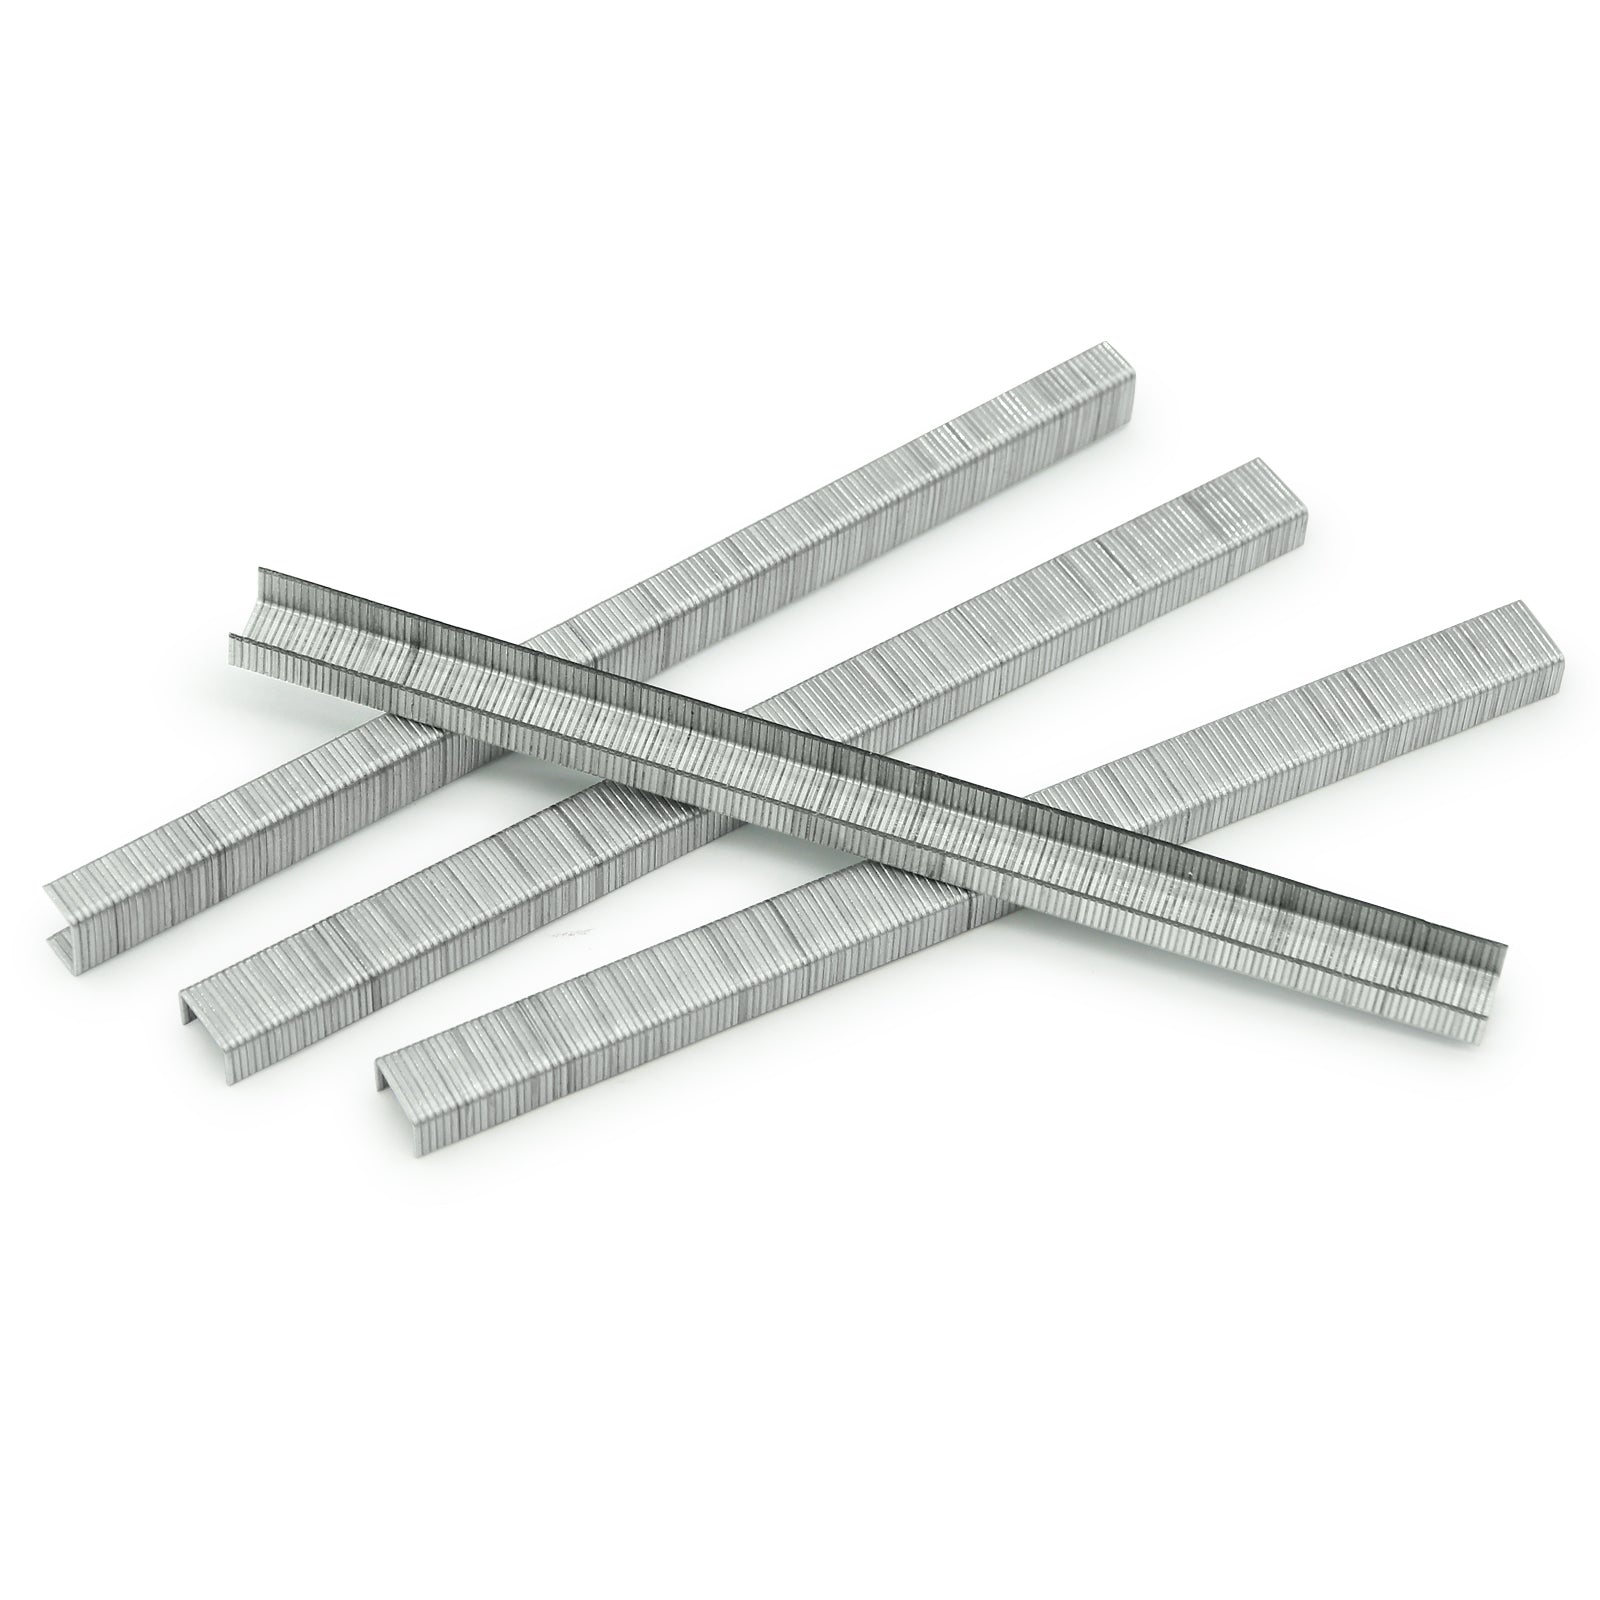 China-top Silver 22 Gauge 71 Series 3/8'' Crown 1/4'' (6mm) Leg Length Galvanized Upholstery Staples (20 Boxes)